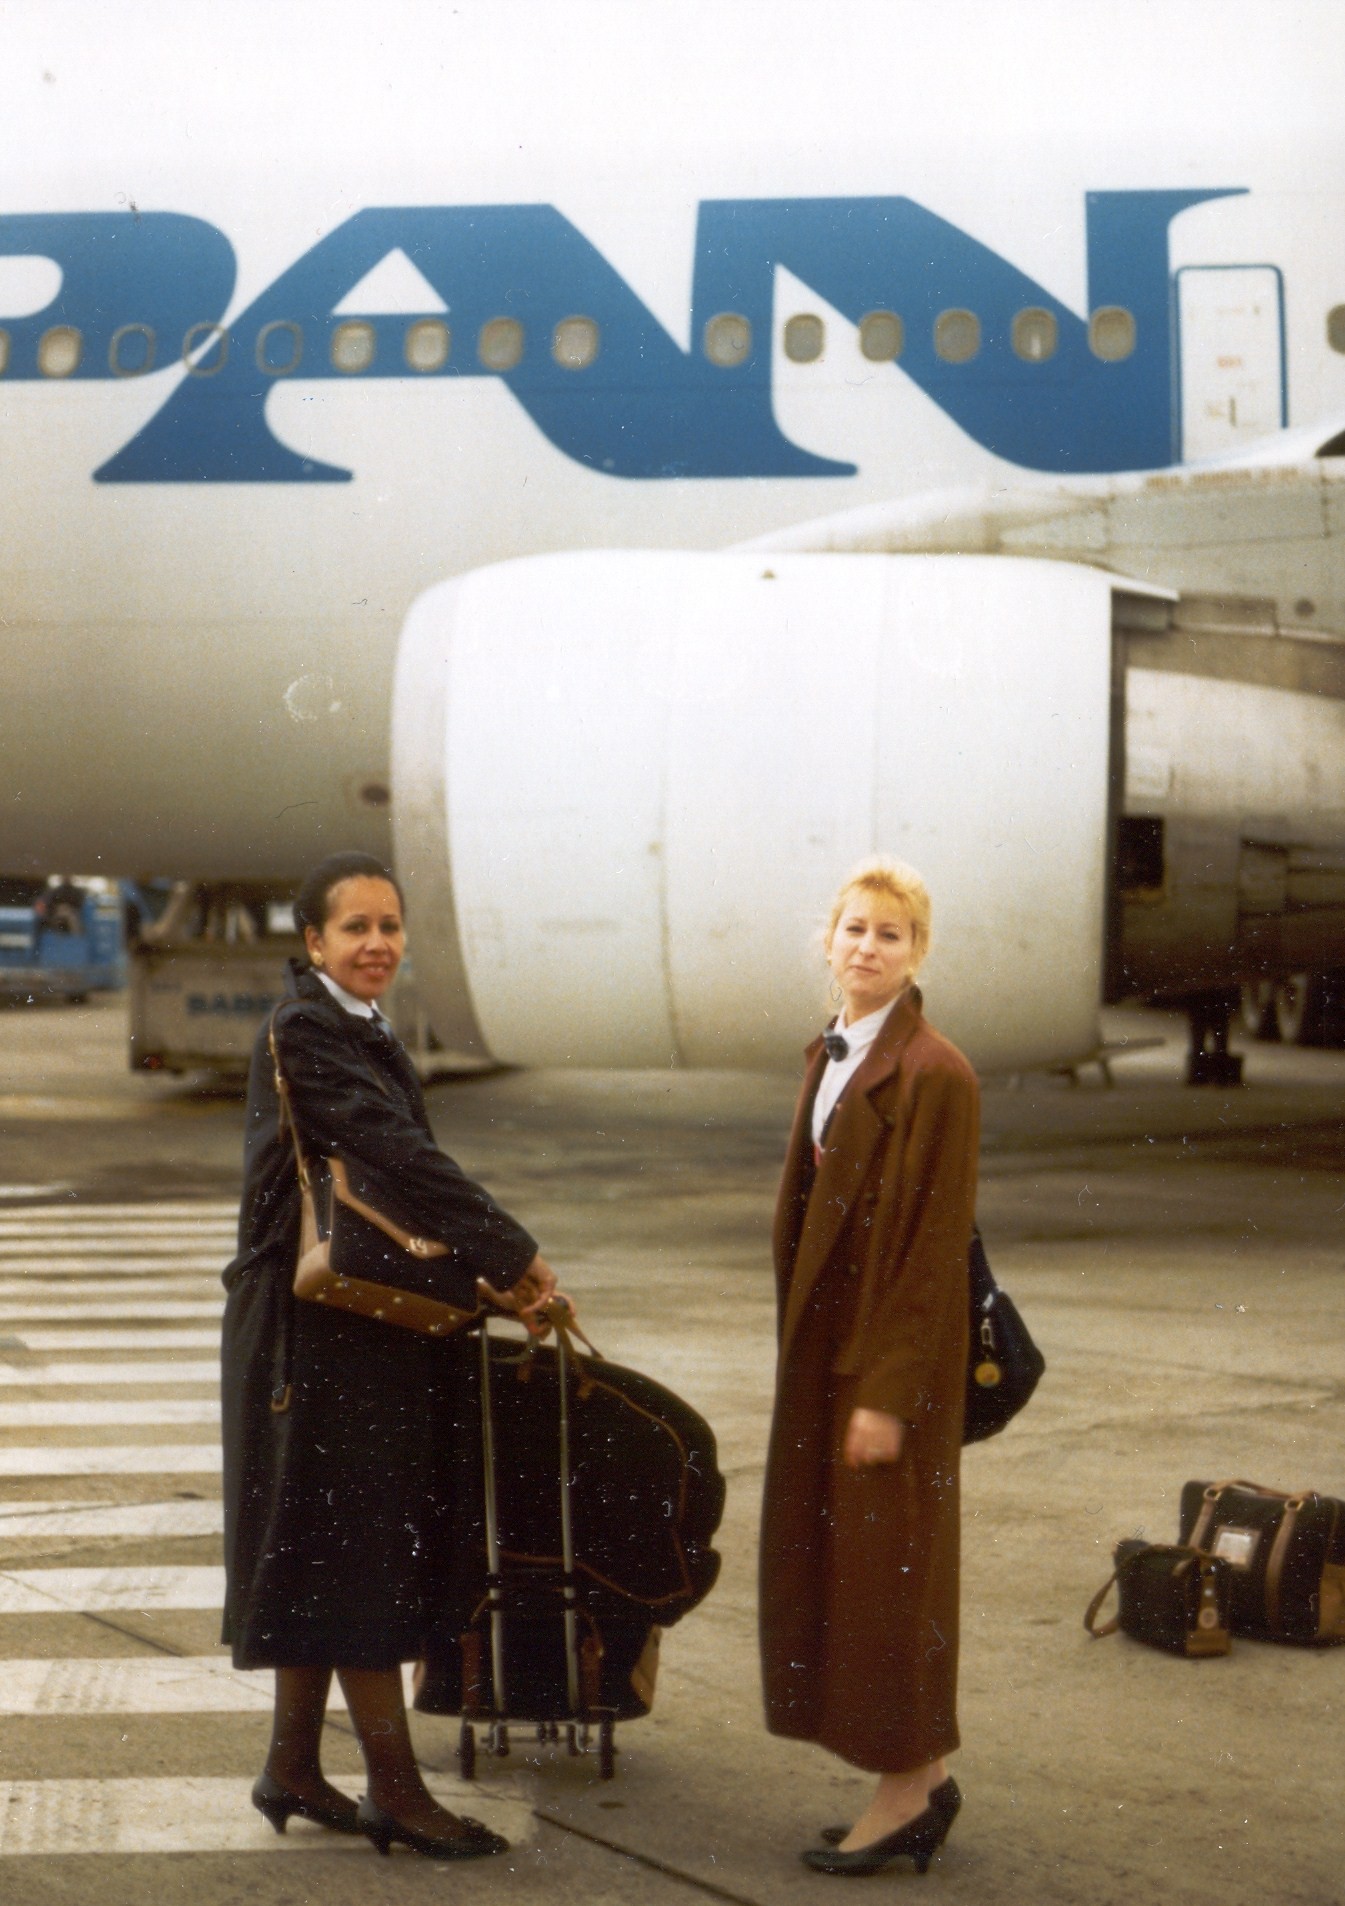 1991 Brussels, Two Pan Am Flight Attendants pose by an Airbus A310 aircraft prior to returning to New York. returning to NYC.  Beverly is the first name of the Flight Attendant on the left.